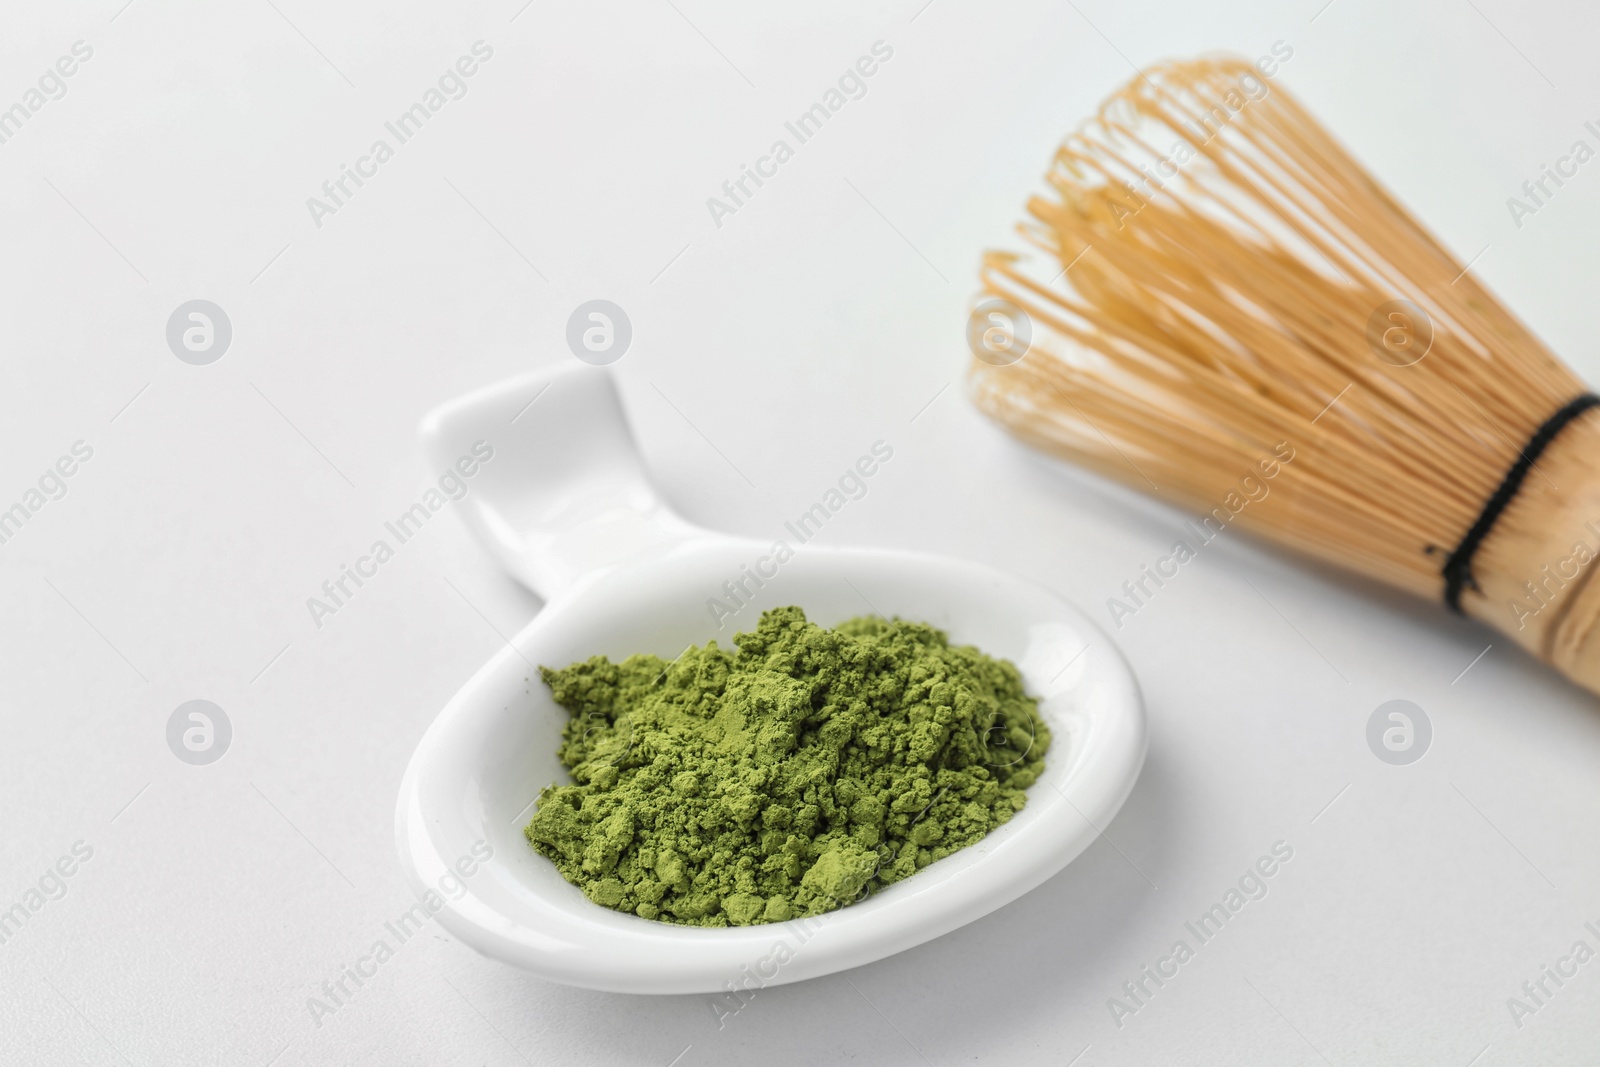 Photo of Powdered matcha tea and chasen on light background